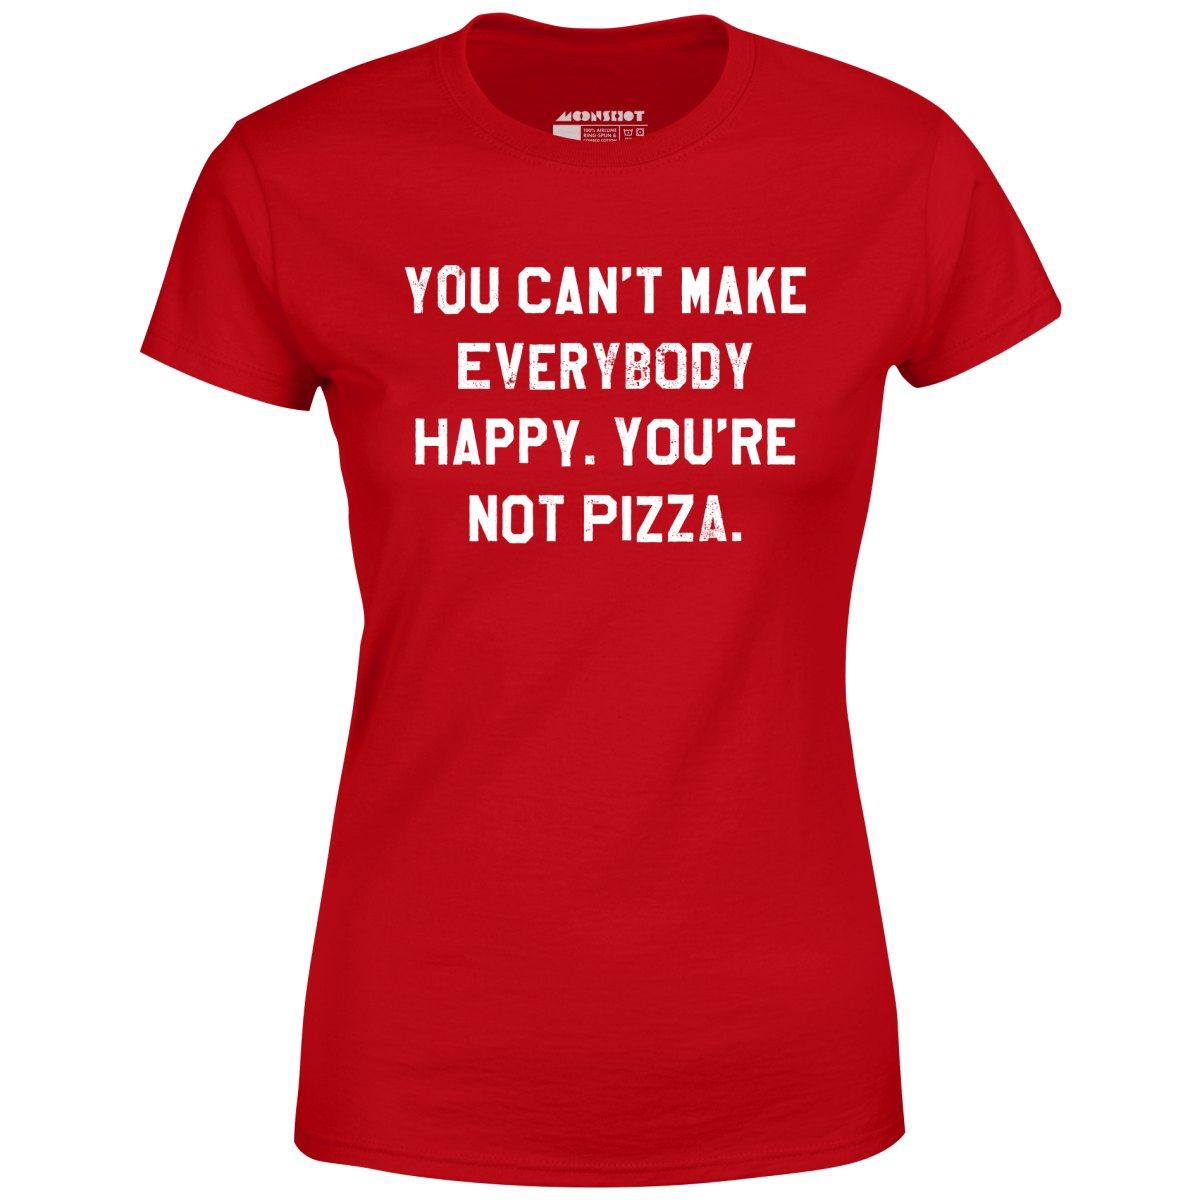 You Can't Make Everybody Happy - Women's T-Shirt